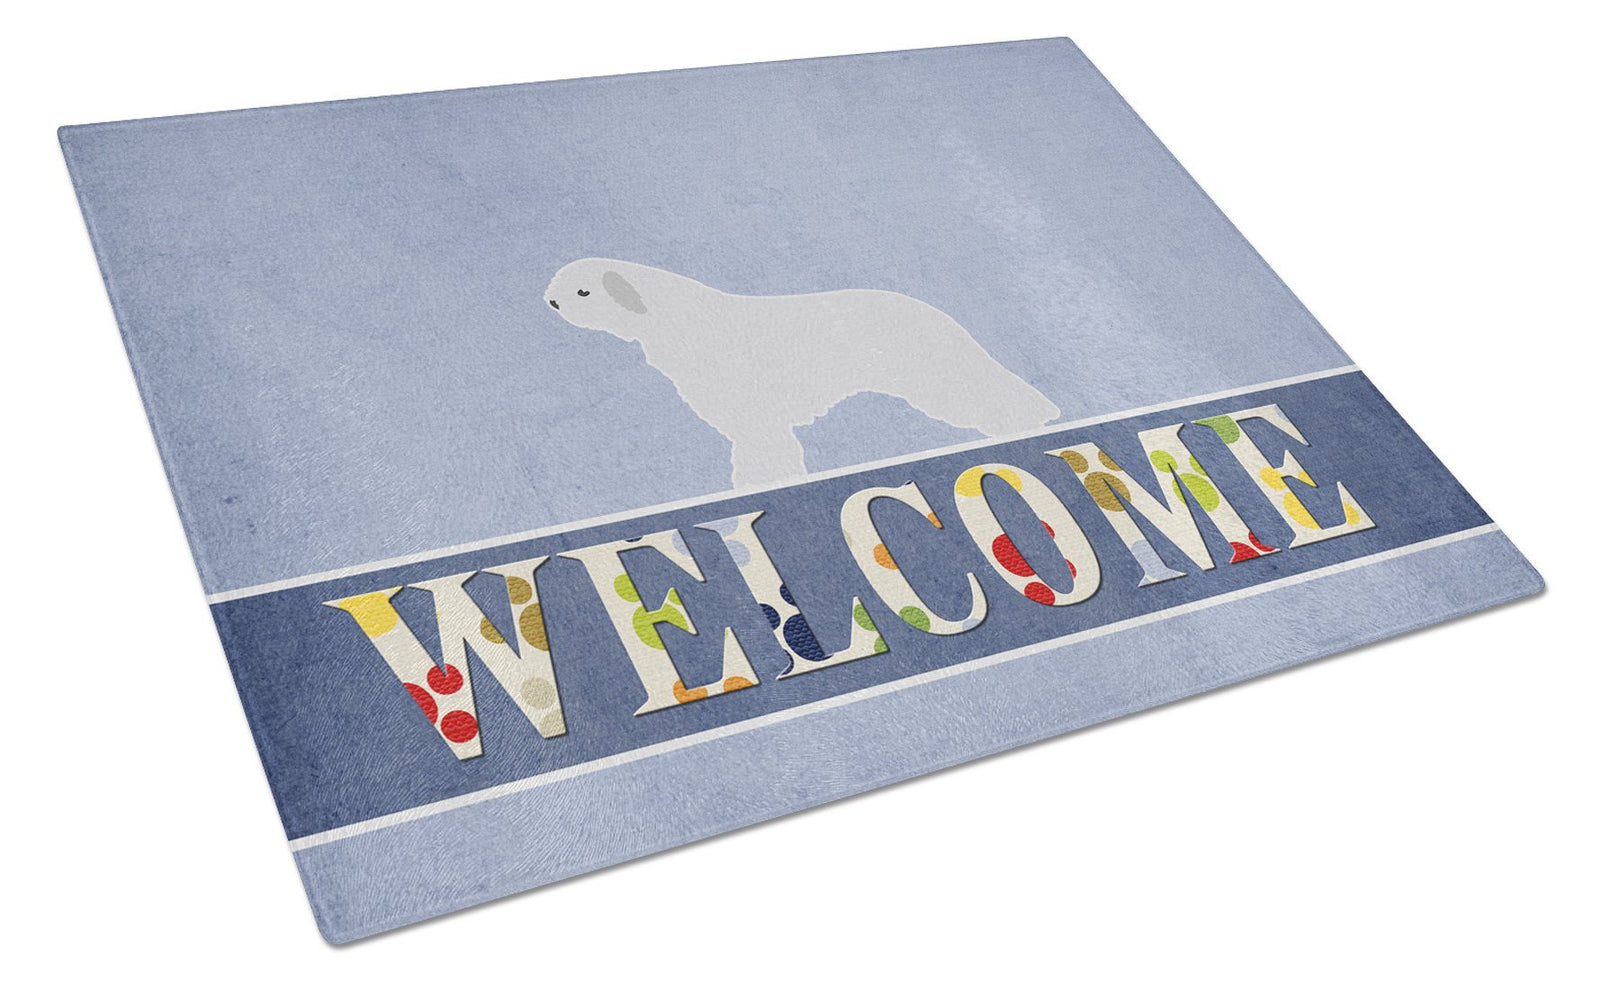 Spanish Water Dog Welcome Glass Cutting Board Large BB5519LCB by Caroline's Treasures